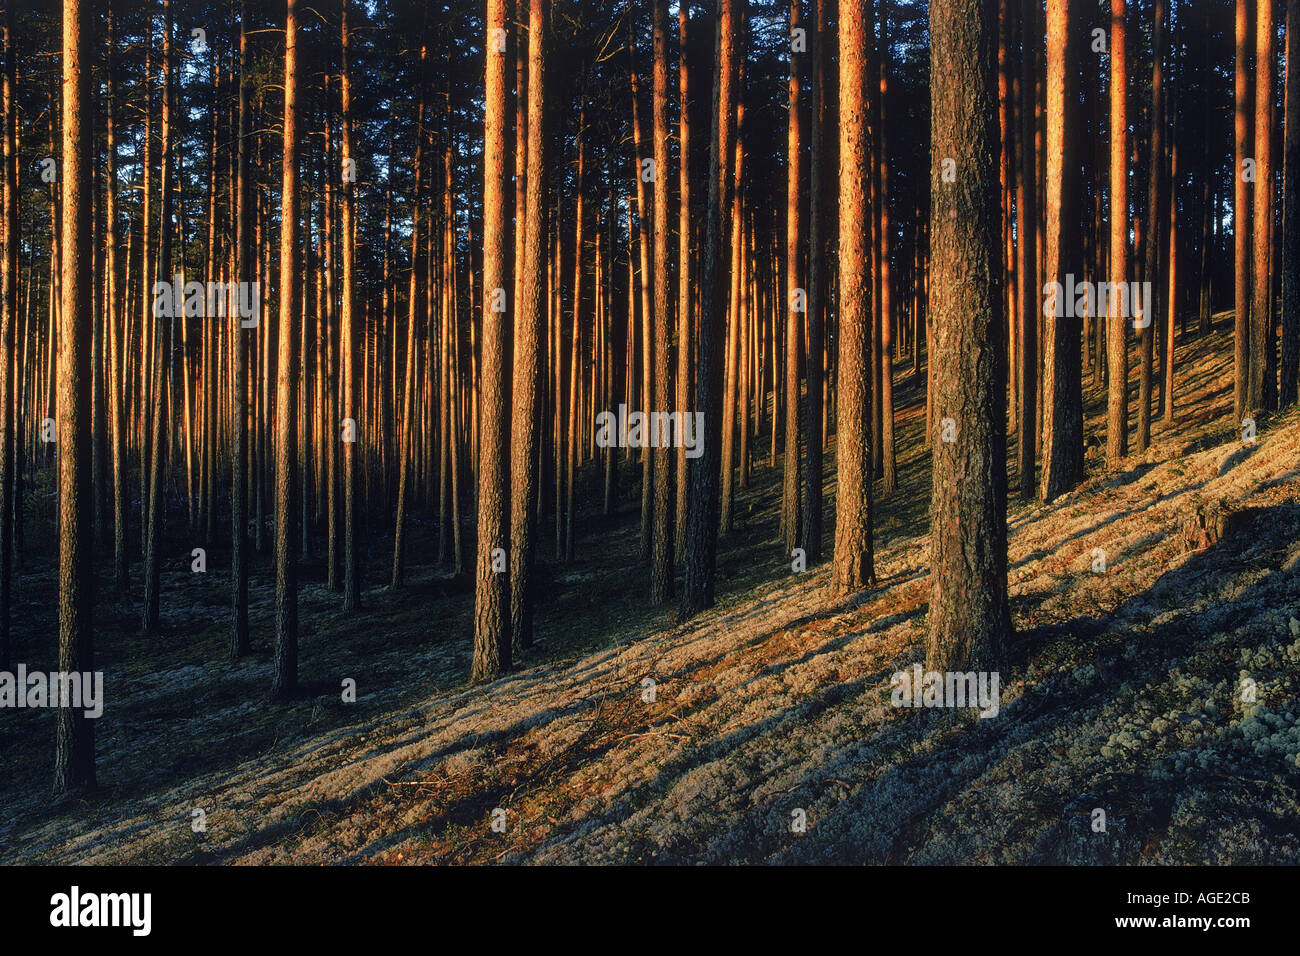 Trunks of cultivated pine trees at sunset in Sweden Stock Photo